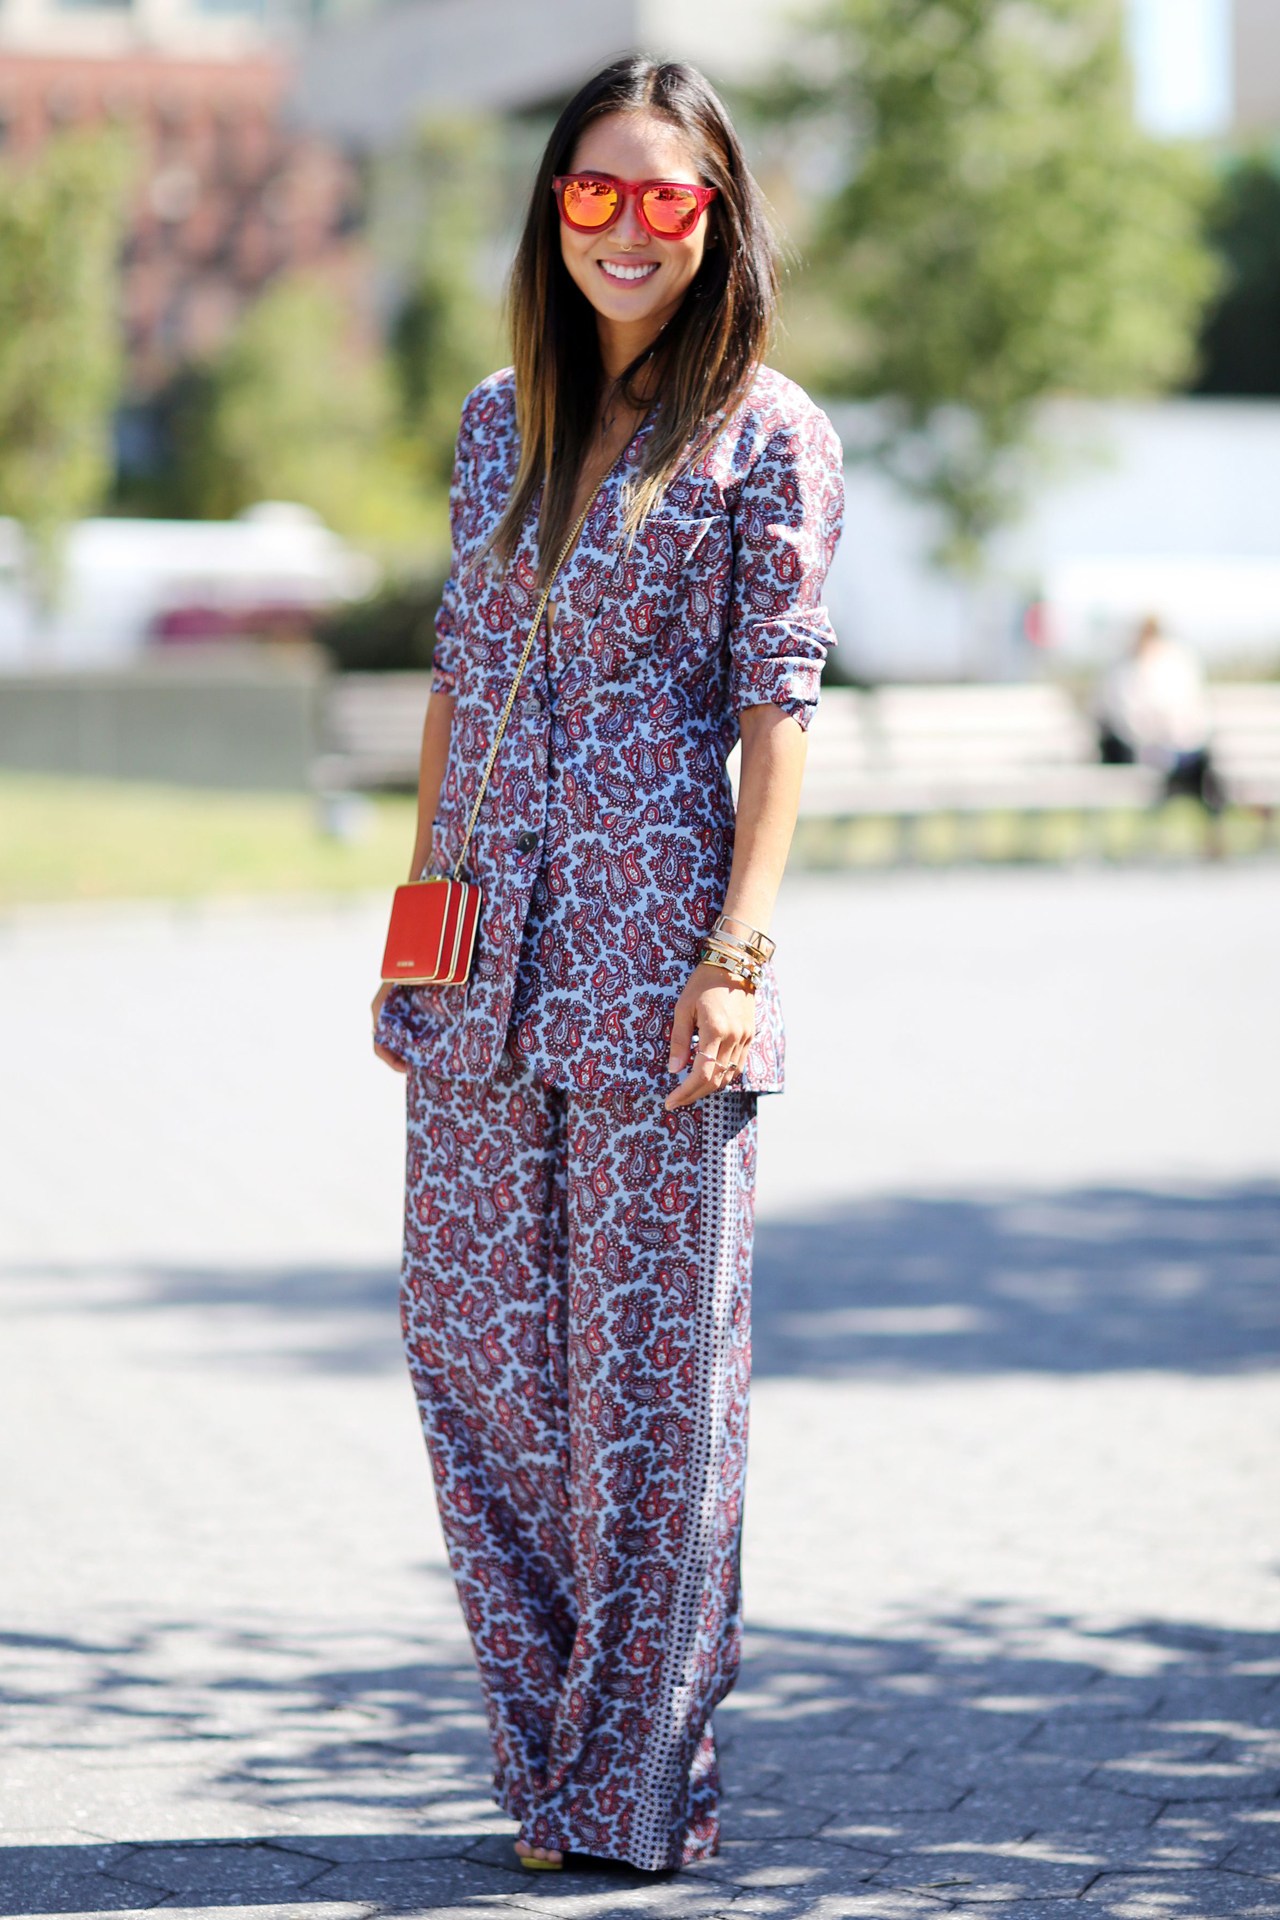 Is the pyjamas fashion trend stylish or only comfortable?